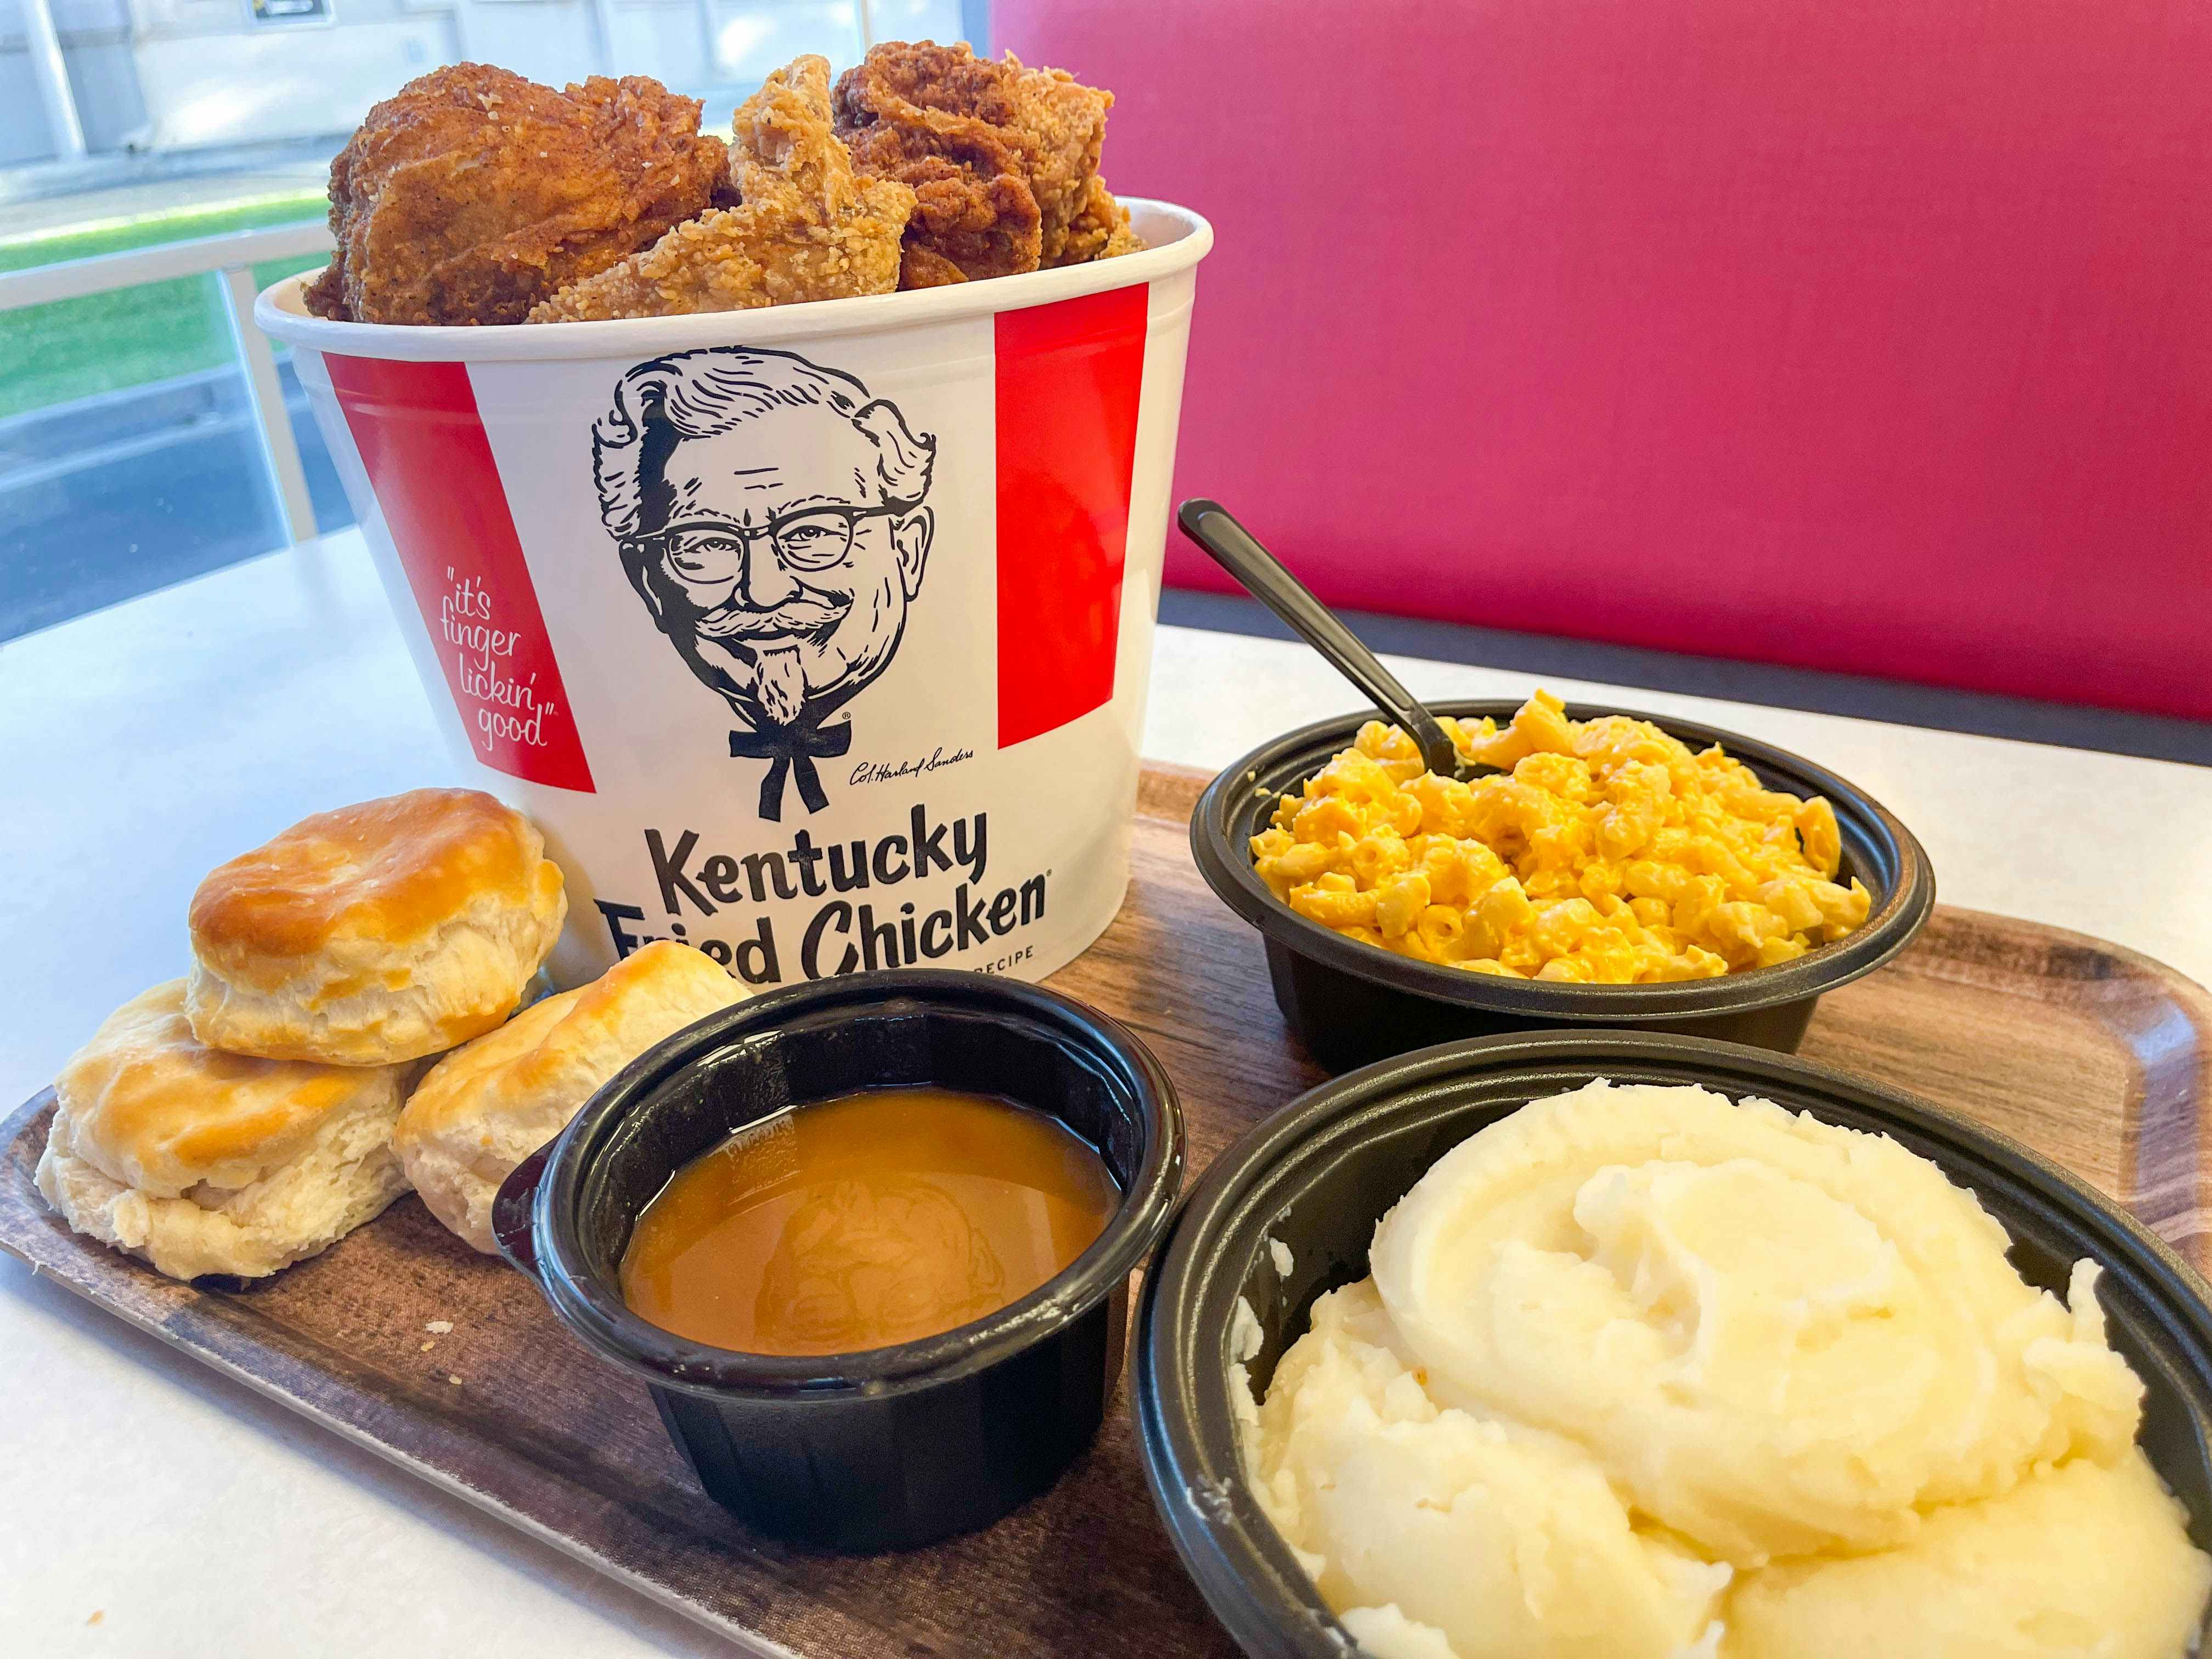 kfc bucket of chicken and meal on table